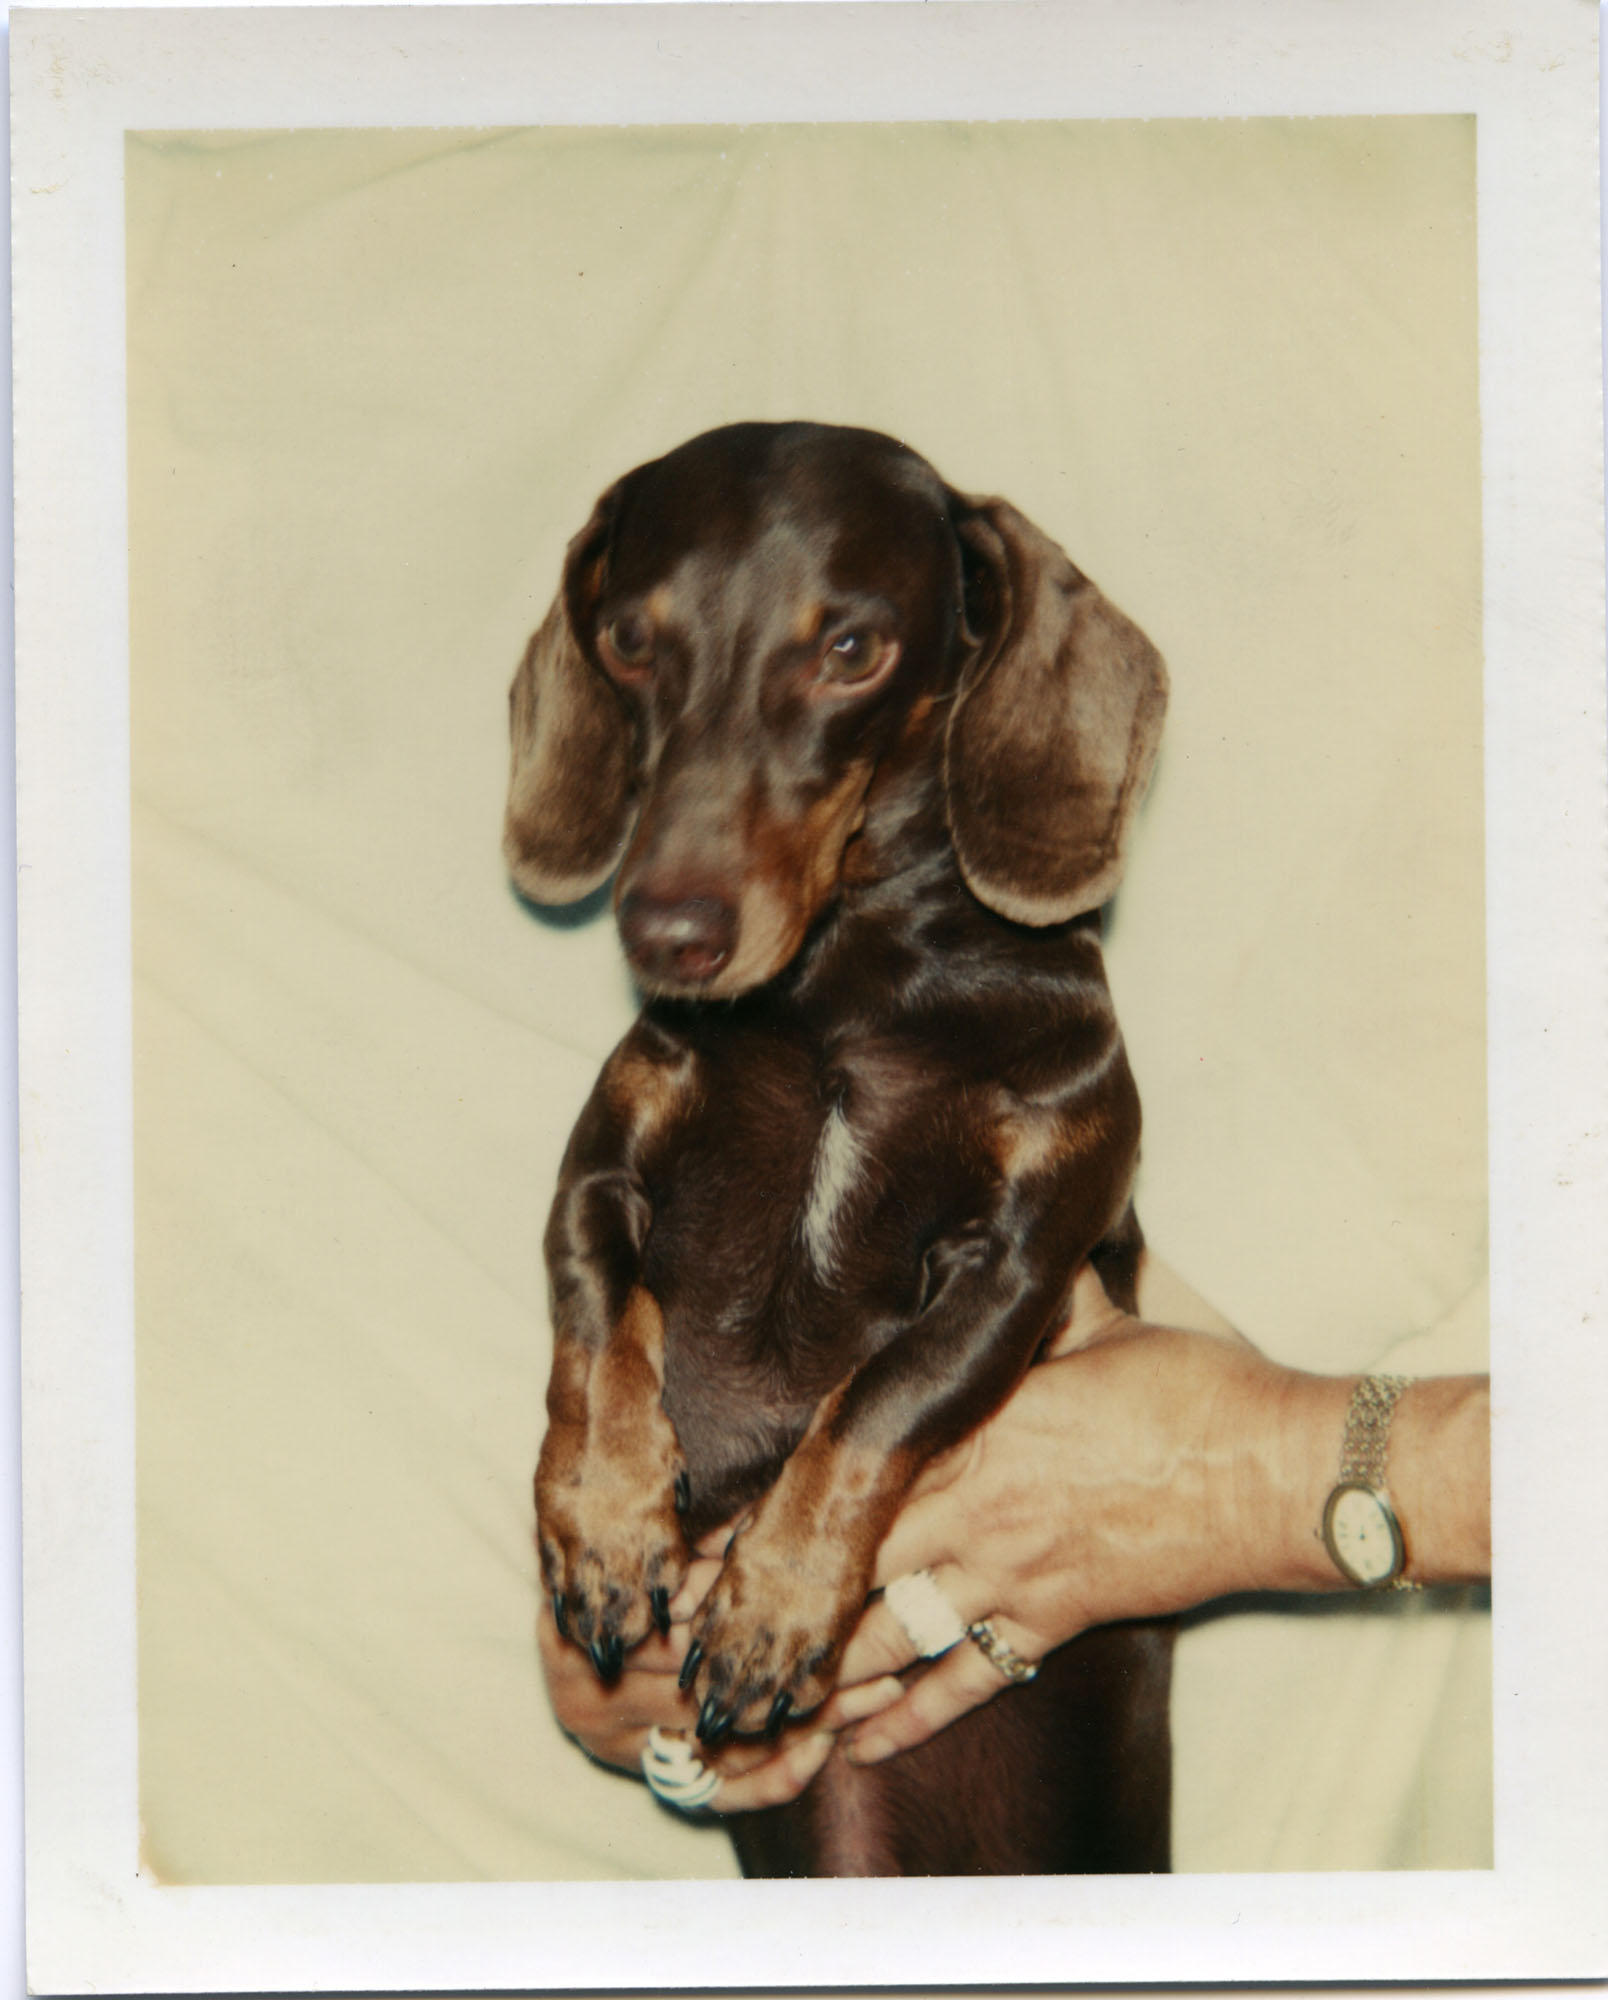 Andy Warhol, Untitled (Dog), 1976. Polaroid color print. Collection of DePaul Art Museum, Gift of the Andy Warhol Foundation for the Visual Arts, 2008.74.97